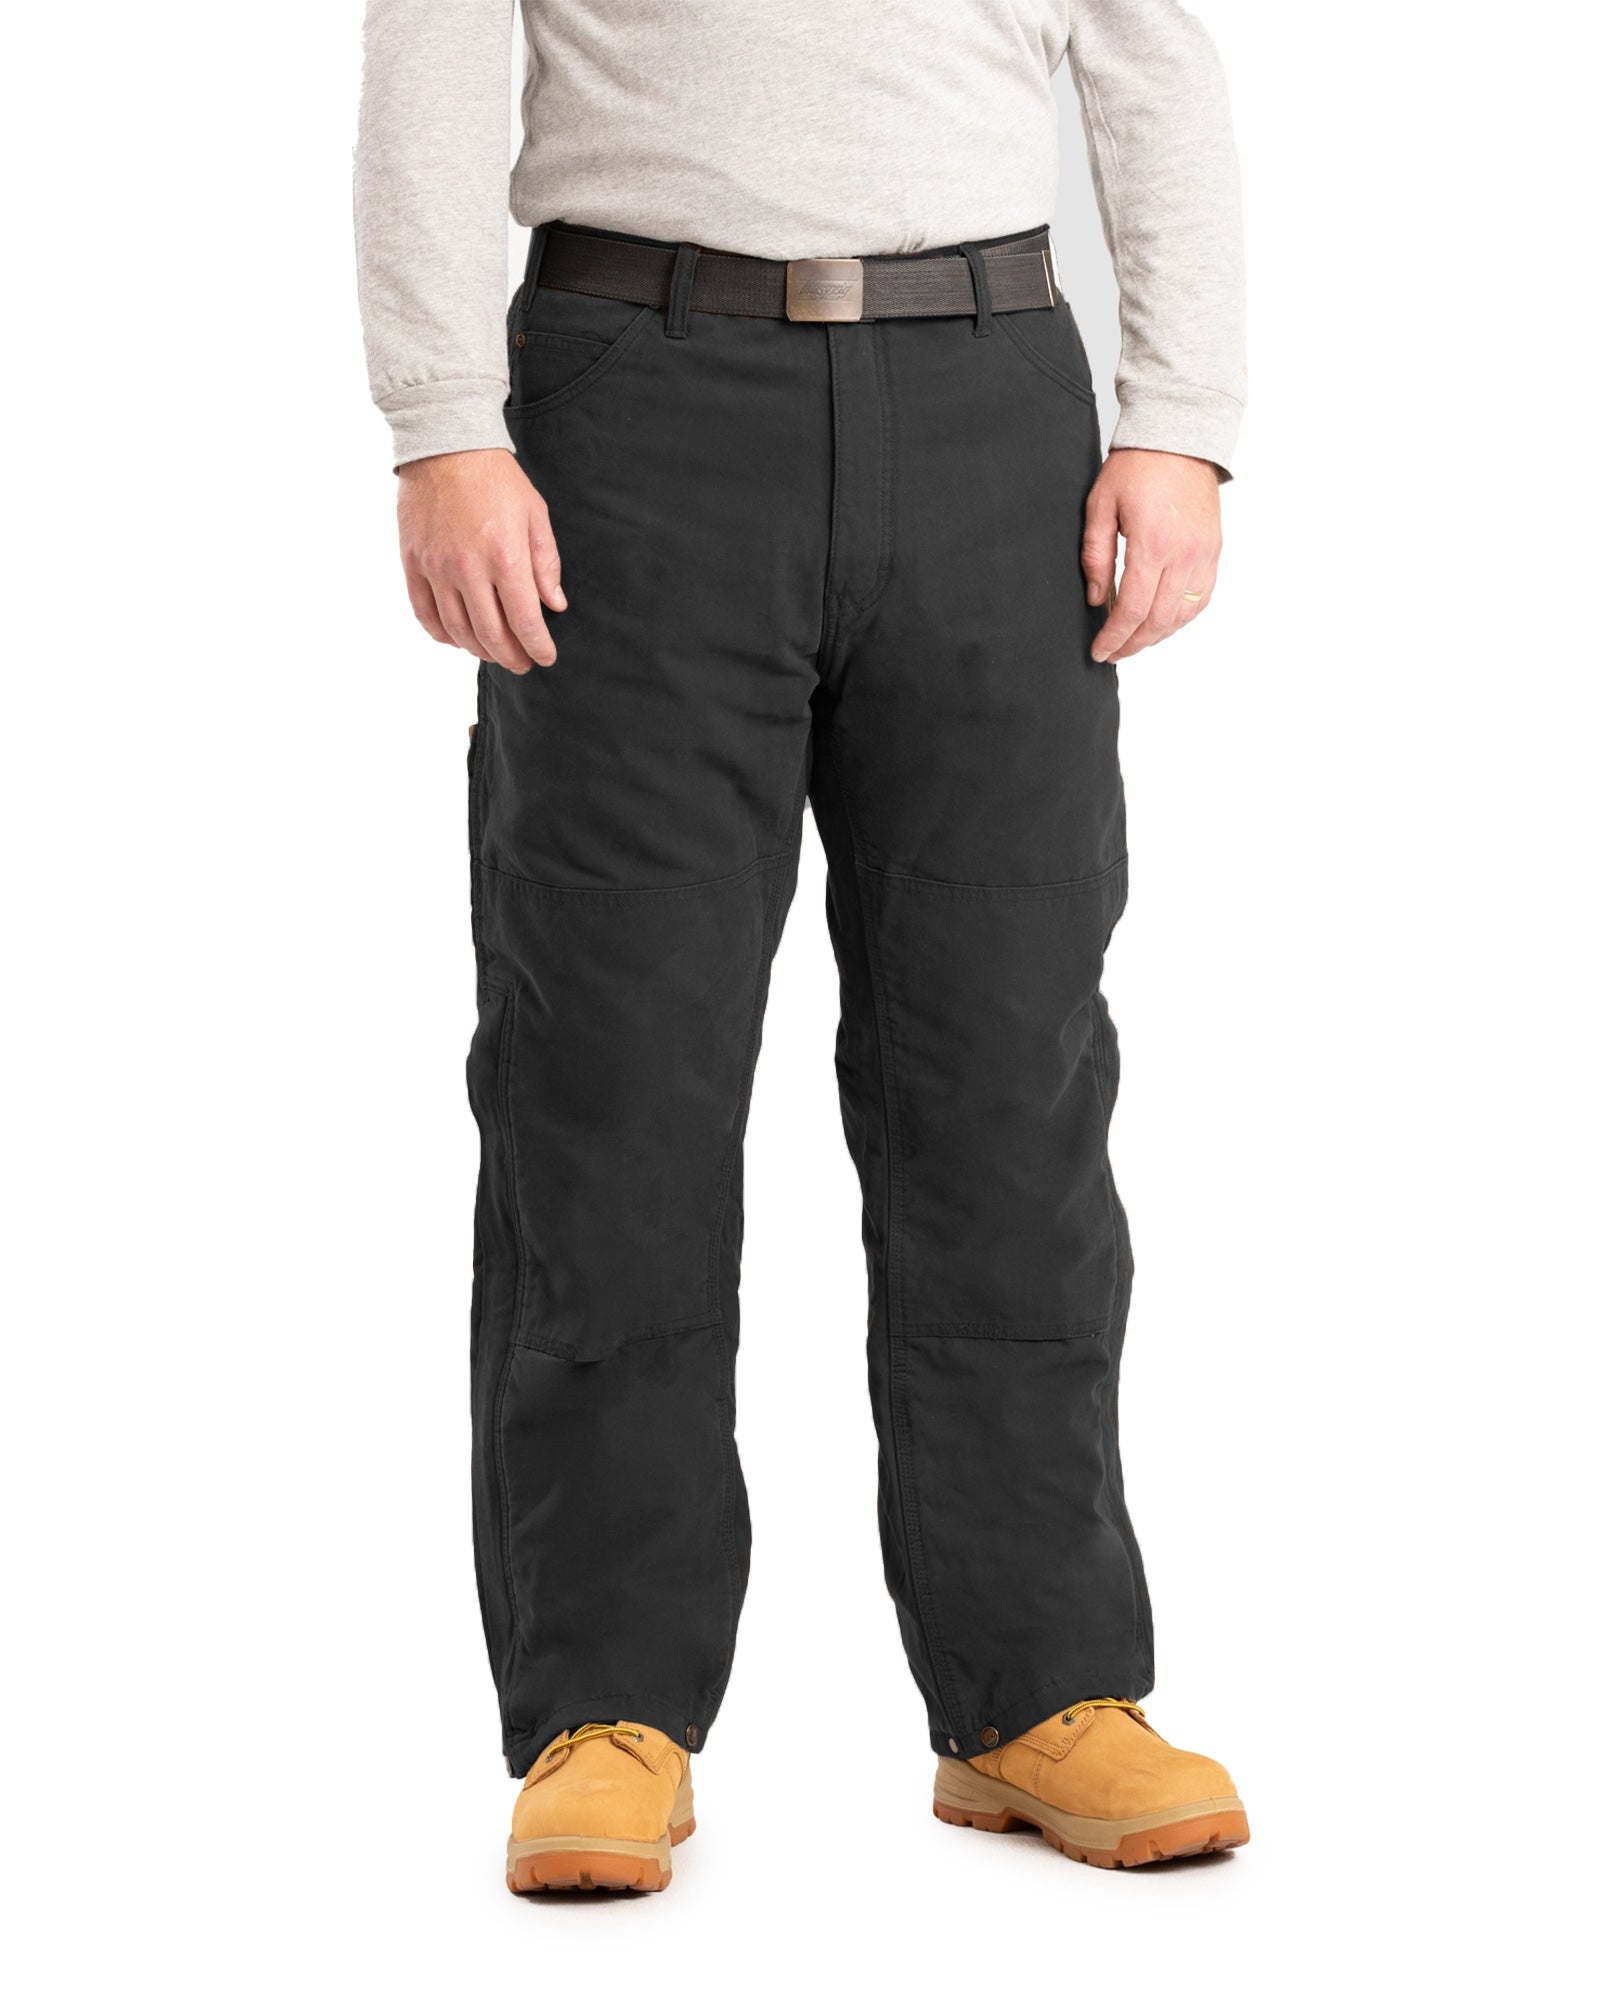 P966BK Highland Washed Duck Insulated Outer Pant